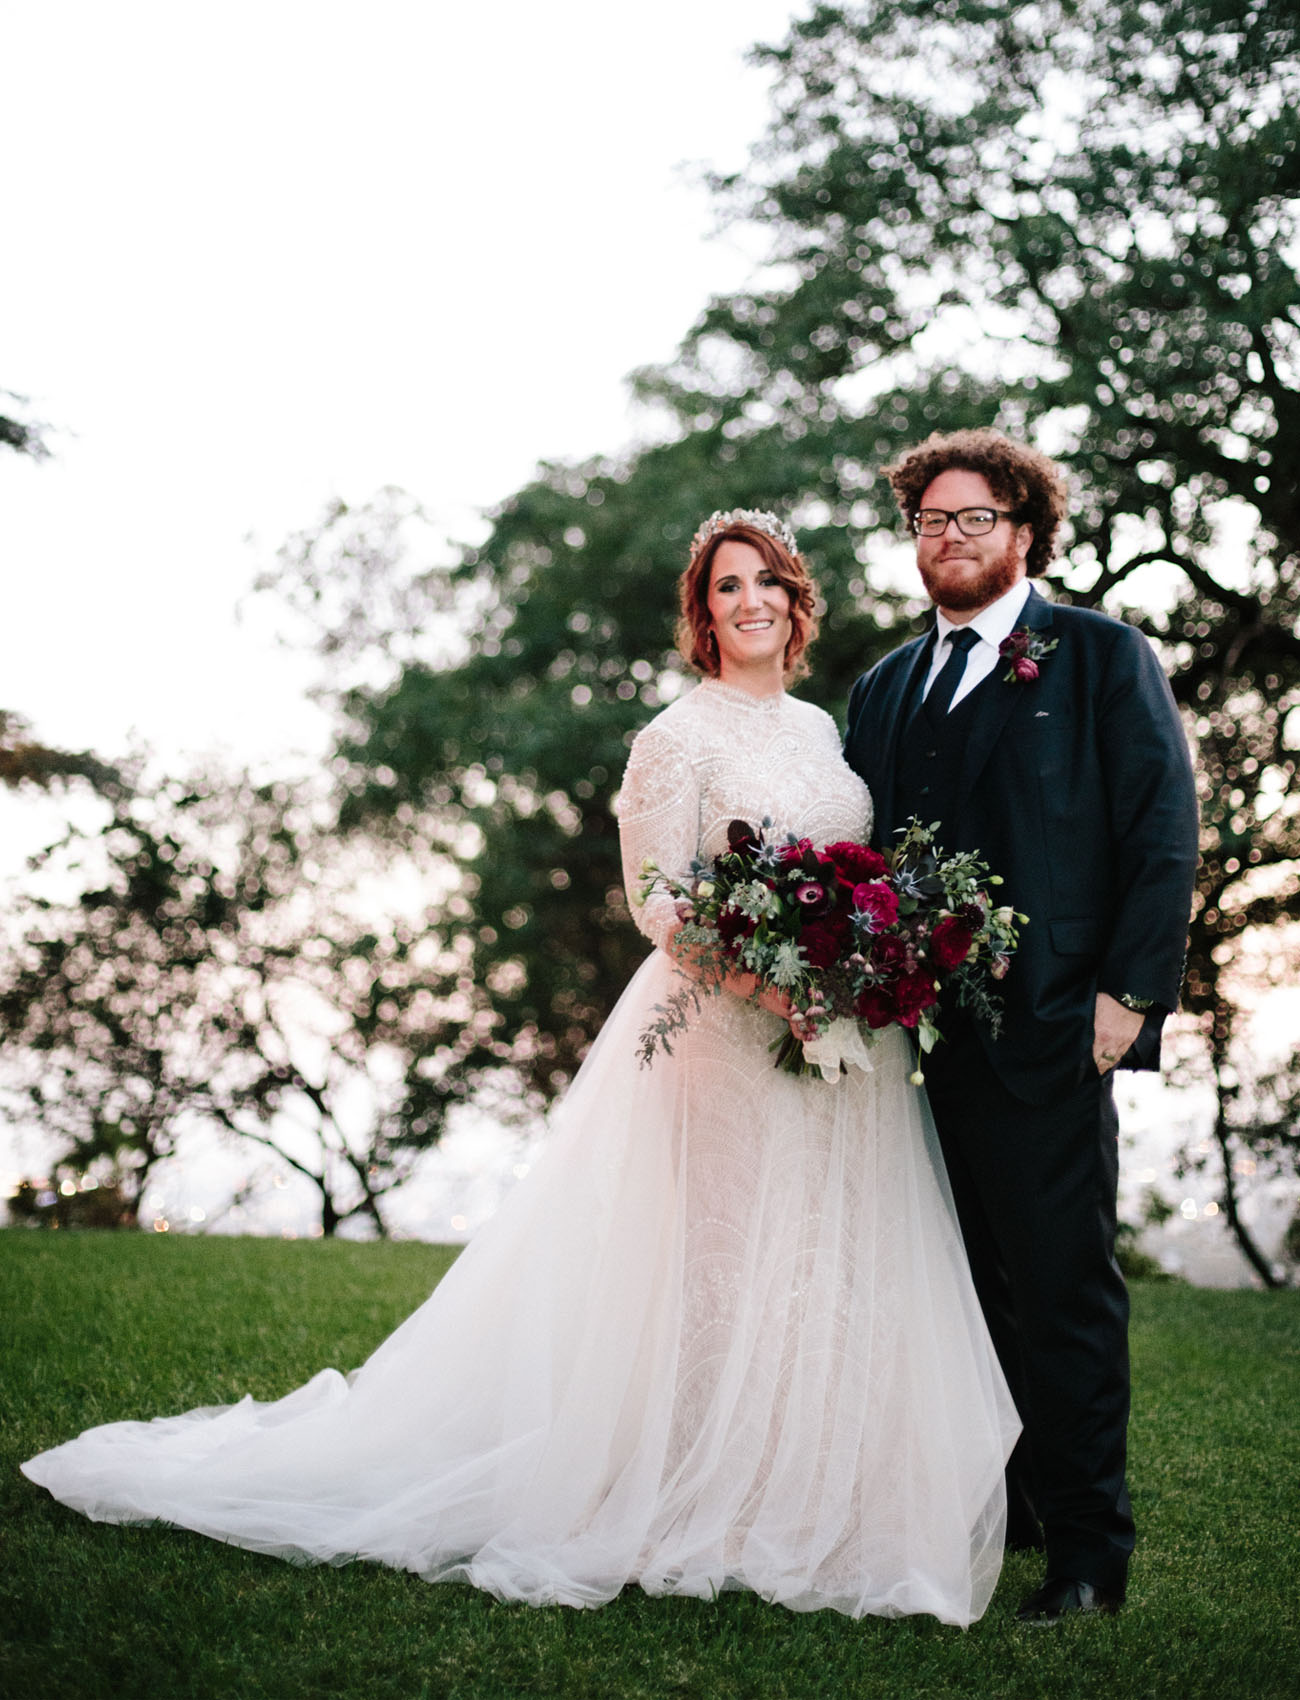 Eclectic + Old World Bohemian-Inspired Wedding in Los Angeles